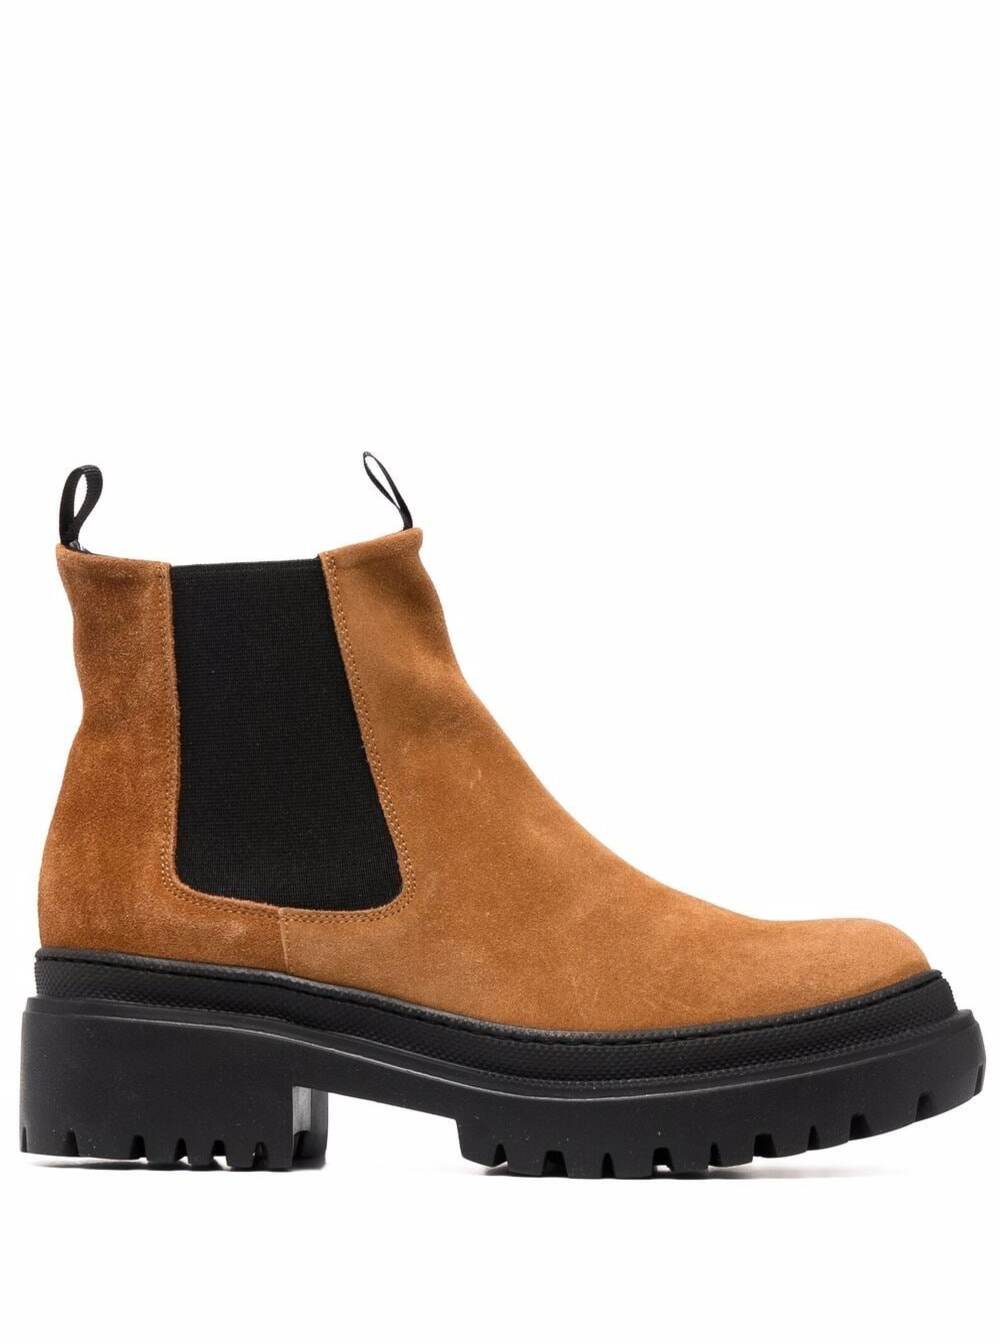 Pollini Camel-colored Suede Ankle Boots